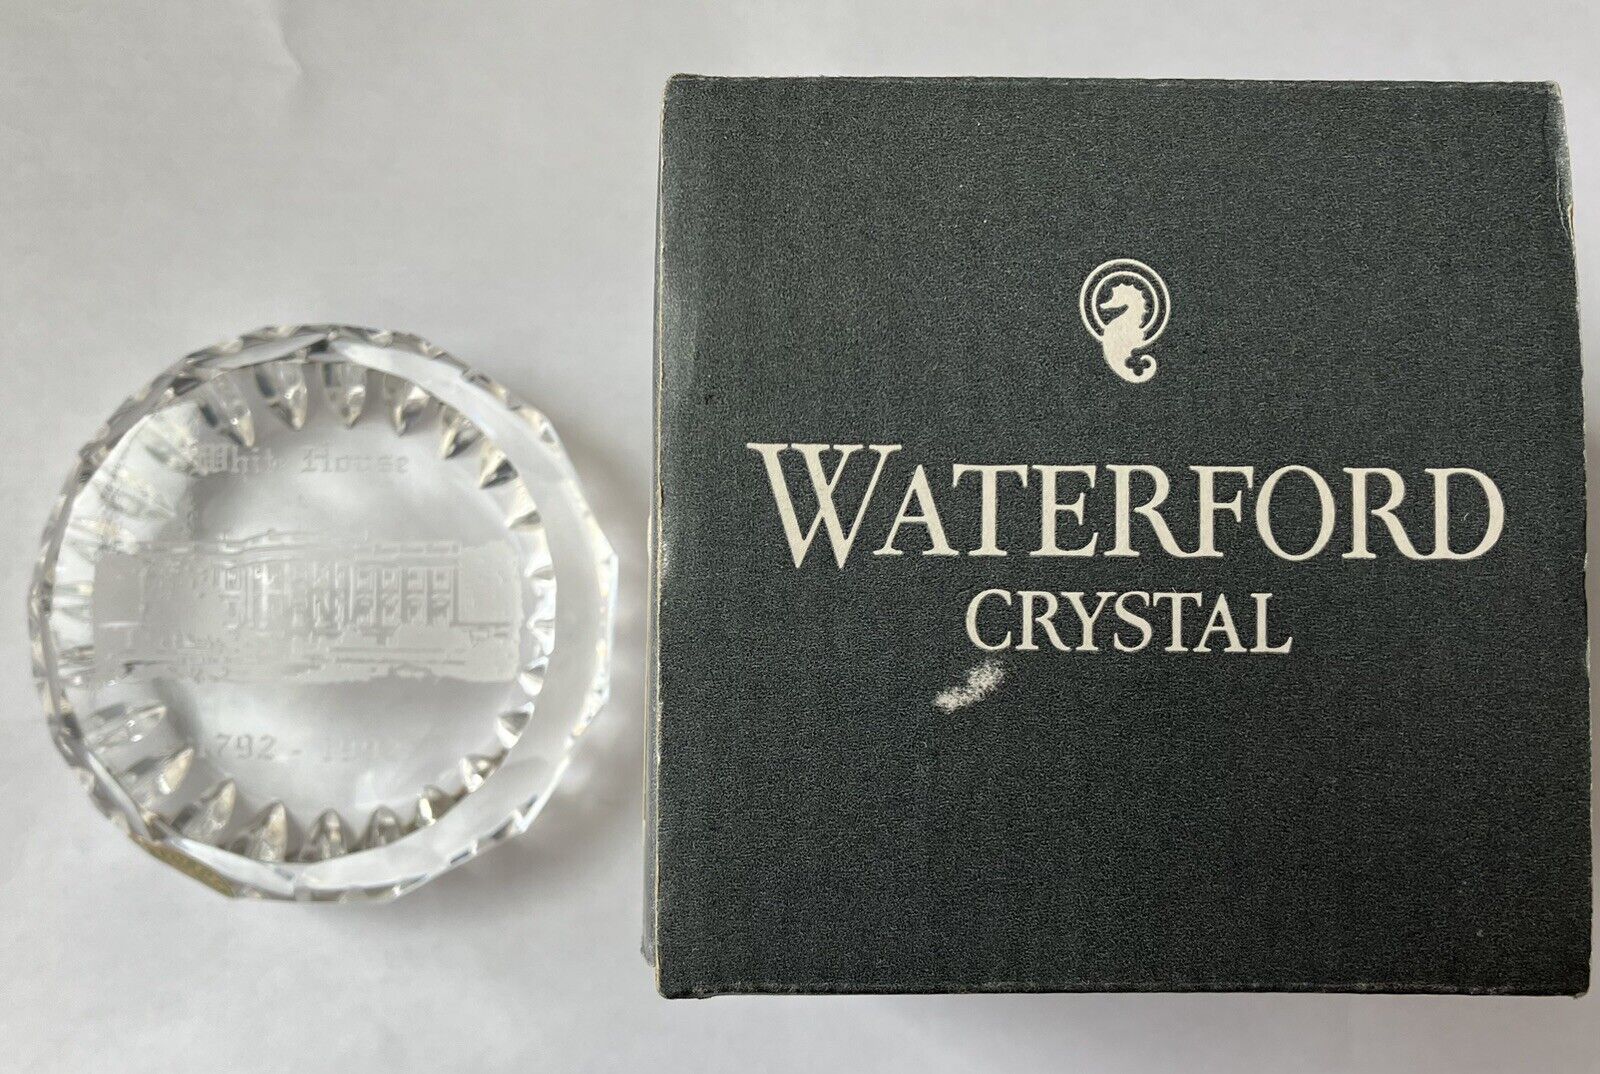 VTG 1992 Waterford Crystal White House Paperweight in Original Box + Sticker